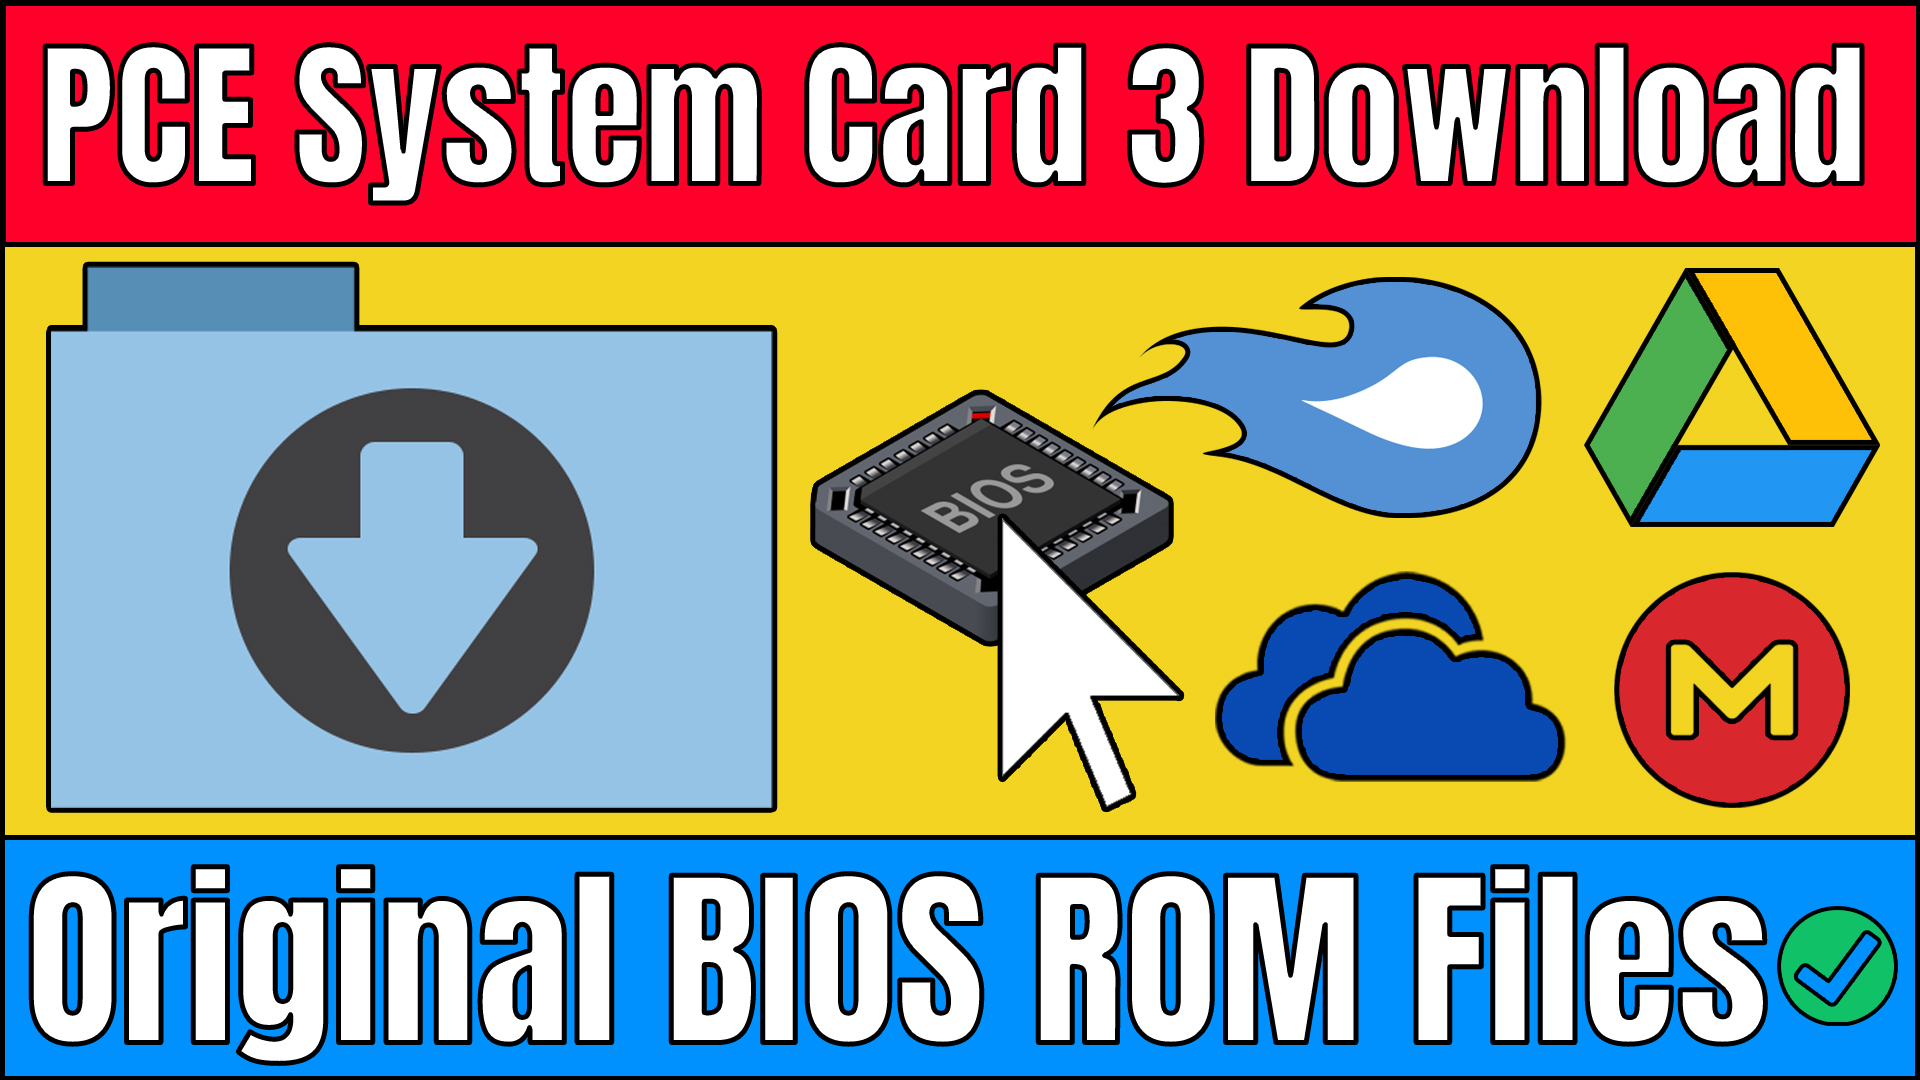 PCE System Card 3 Download